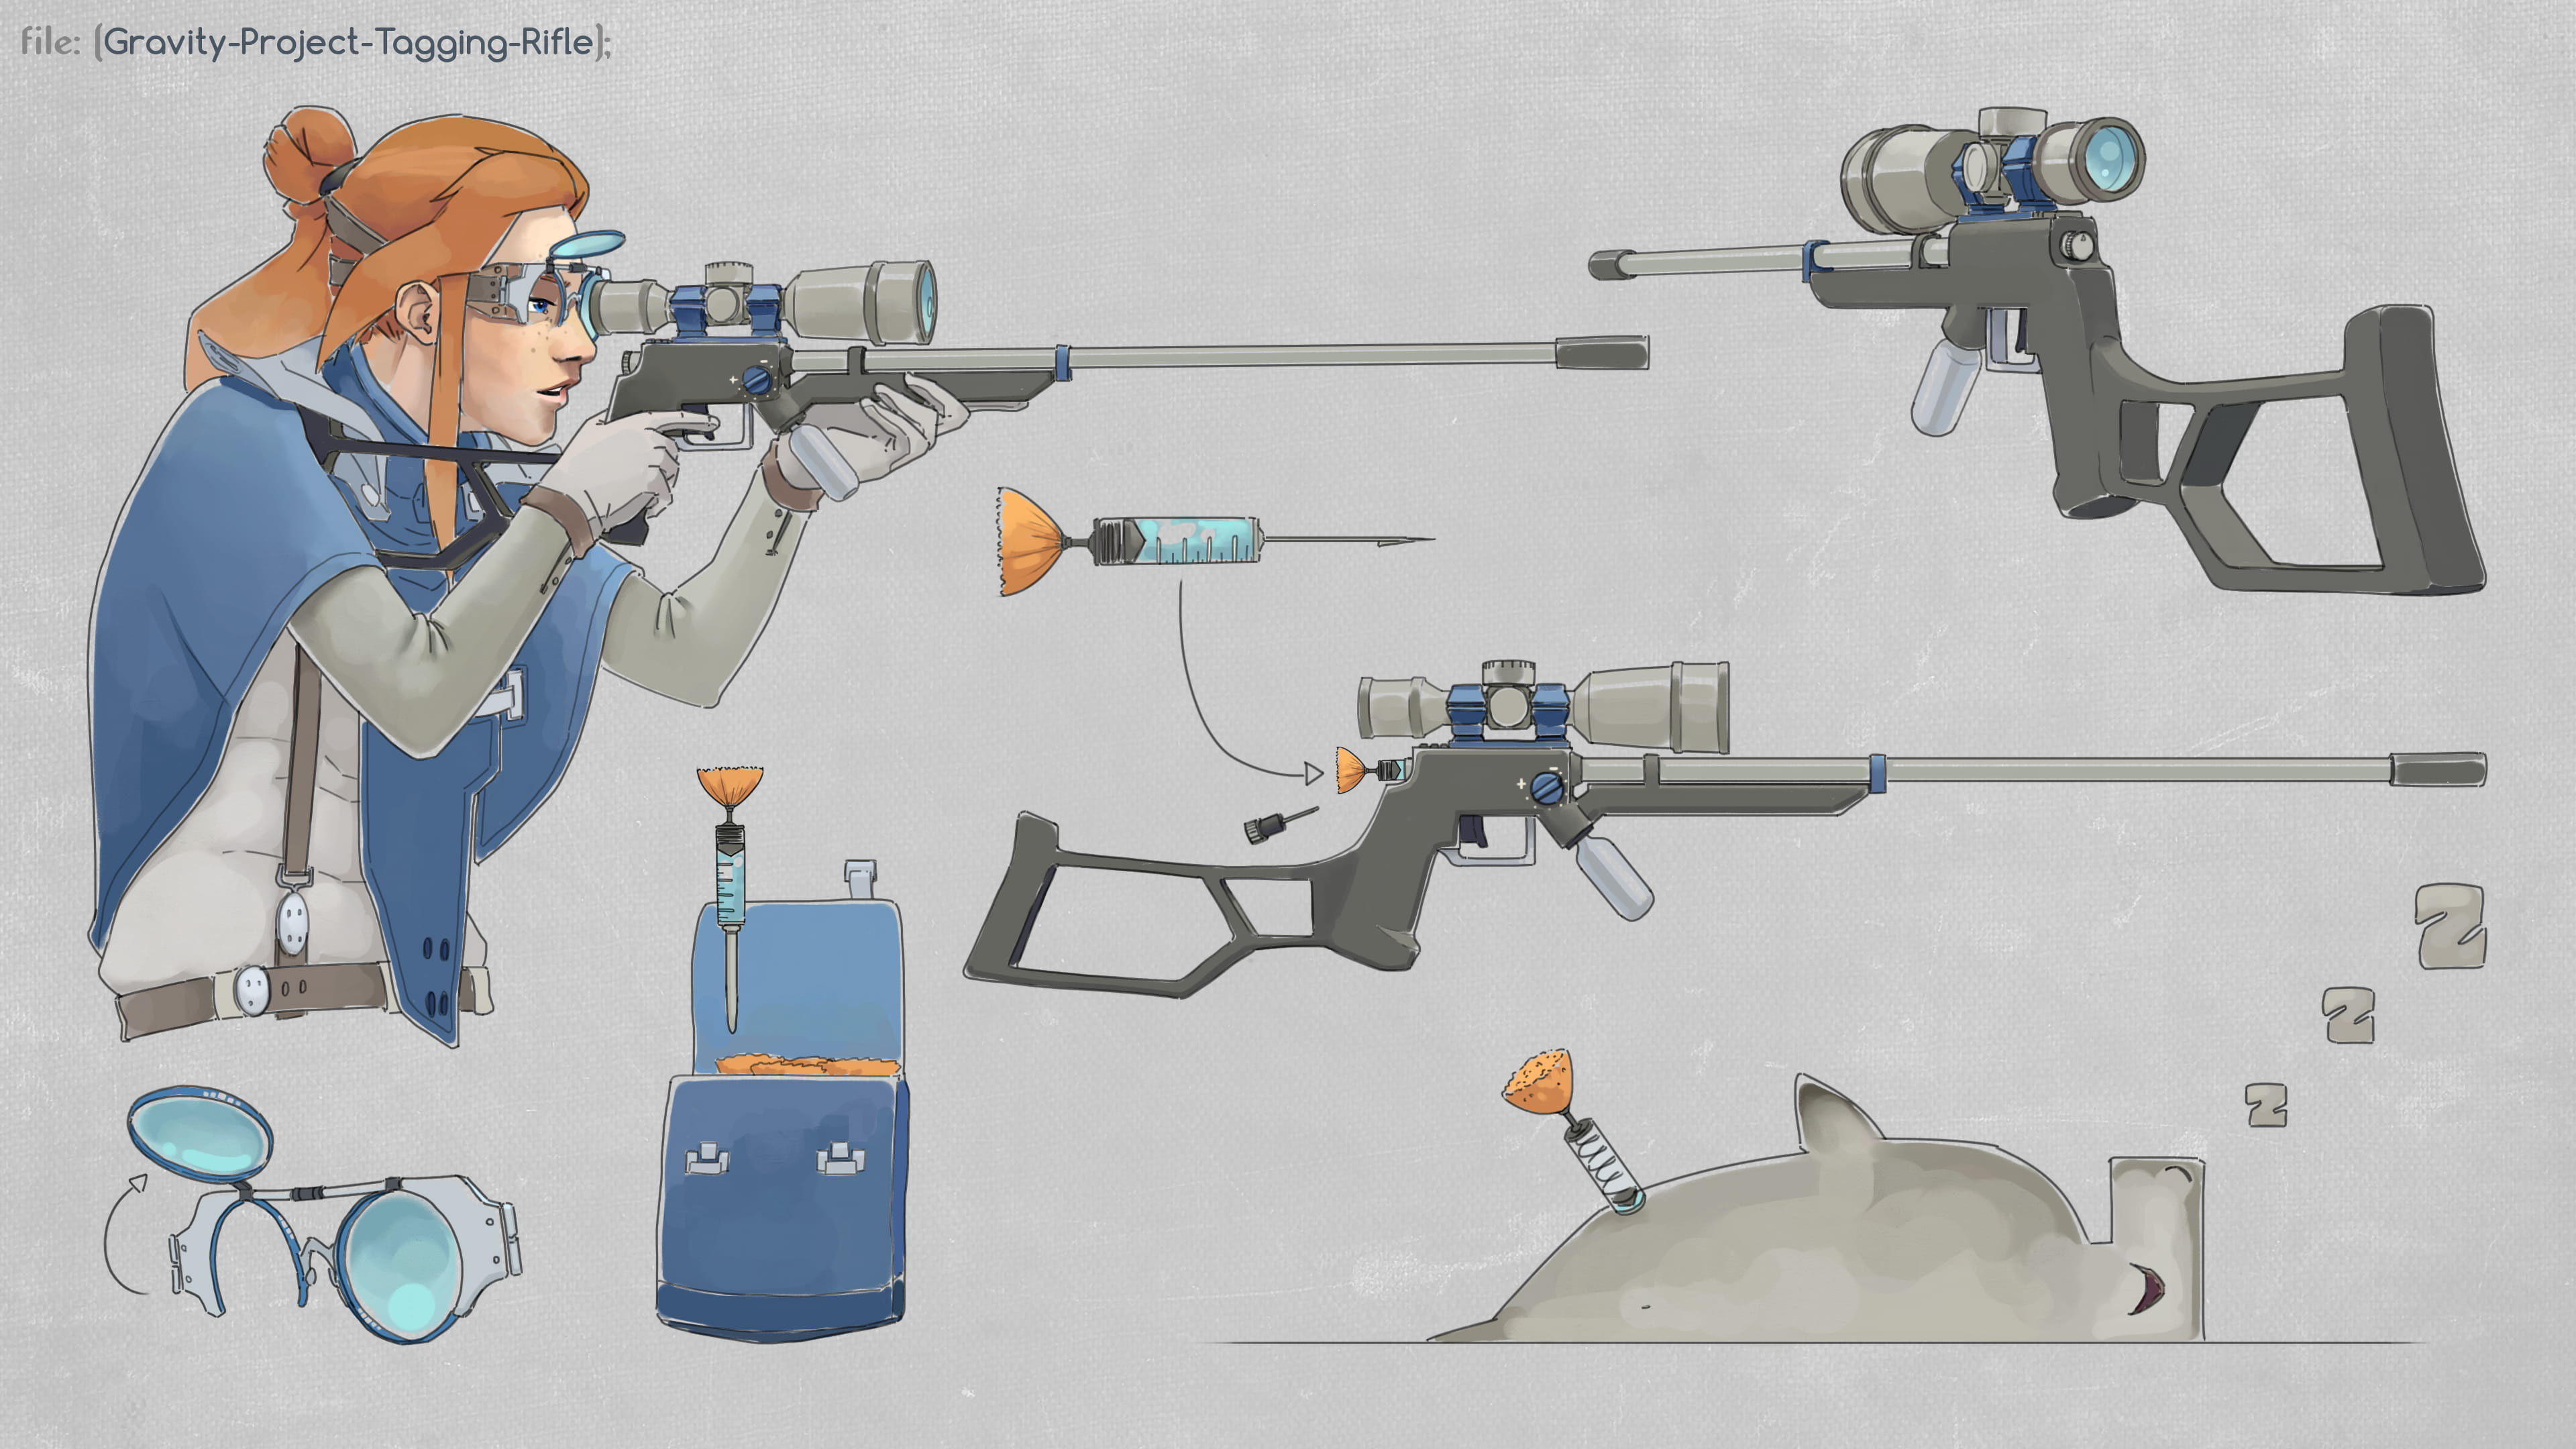 Gravity-Project-Tagging-Rifle